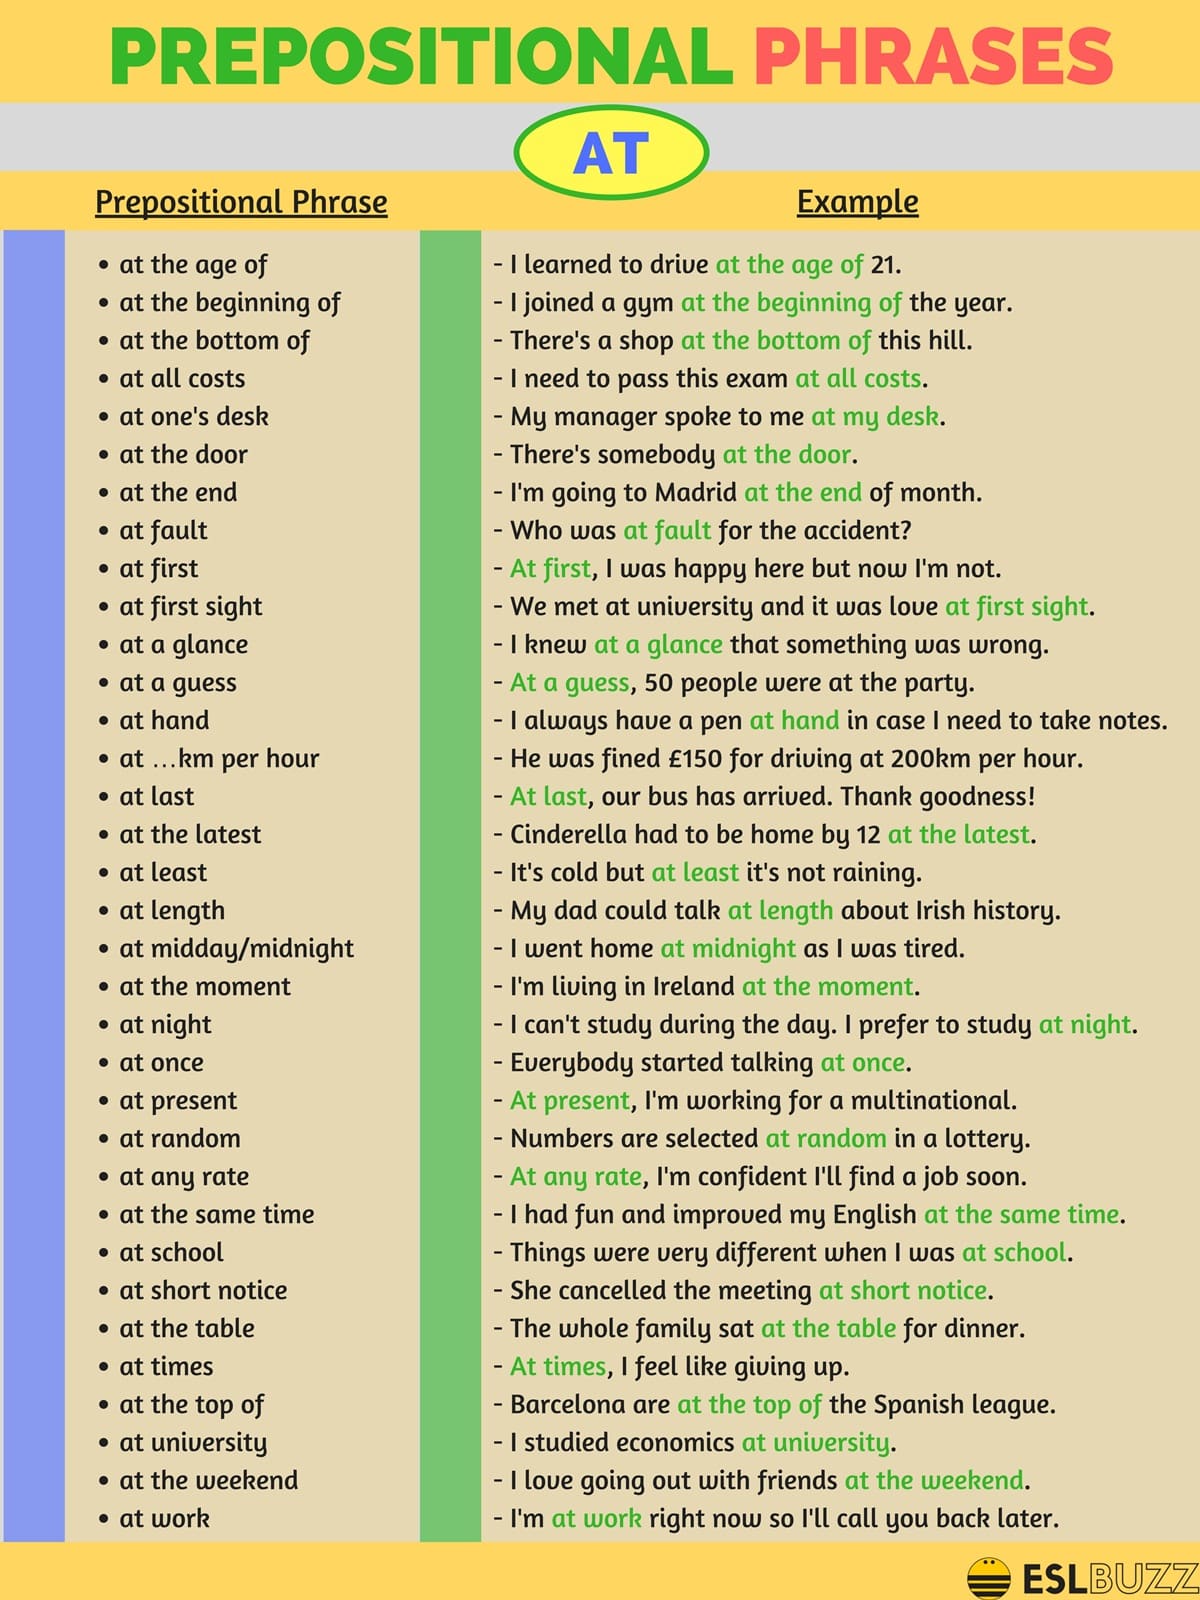 Prepositional Phrases with AT